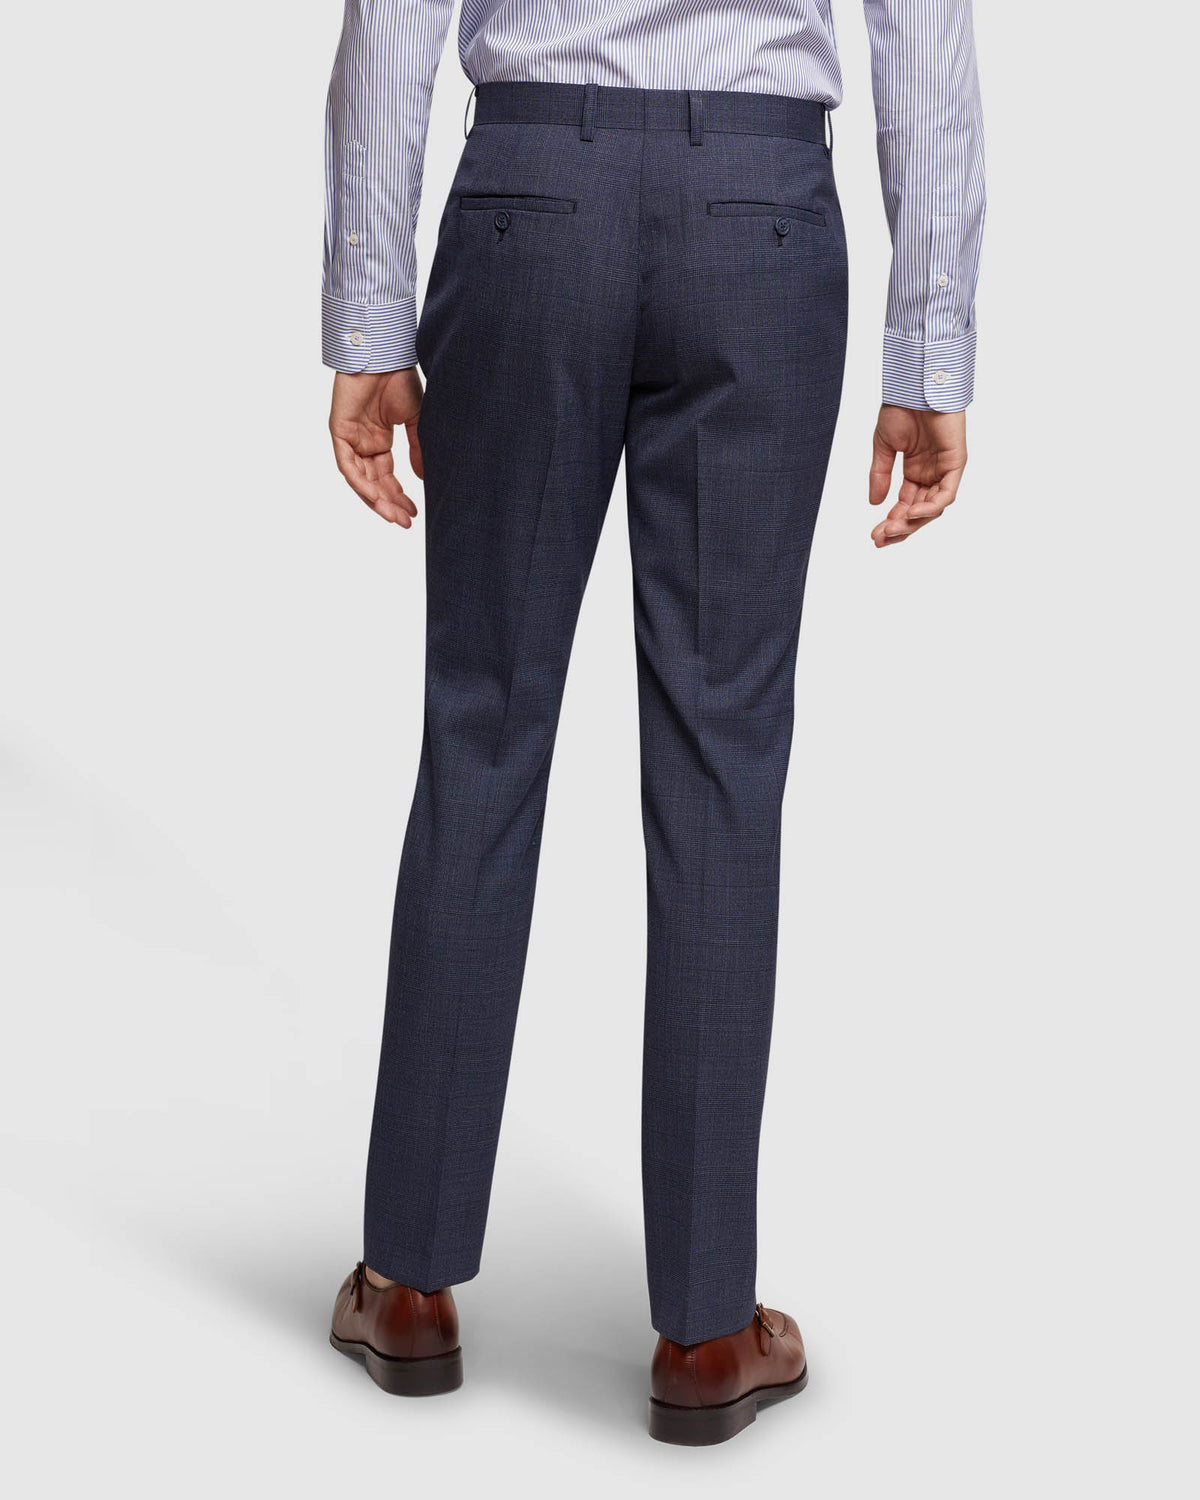 HOPKINS WOOL STRETCH CHECK TROUSERS MENS SUITS